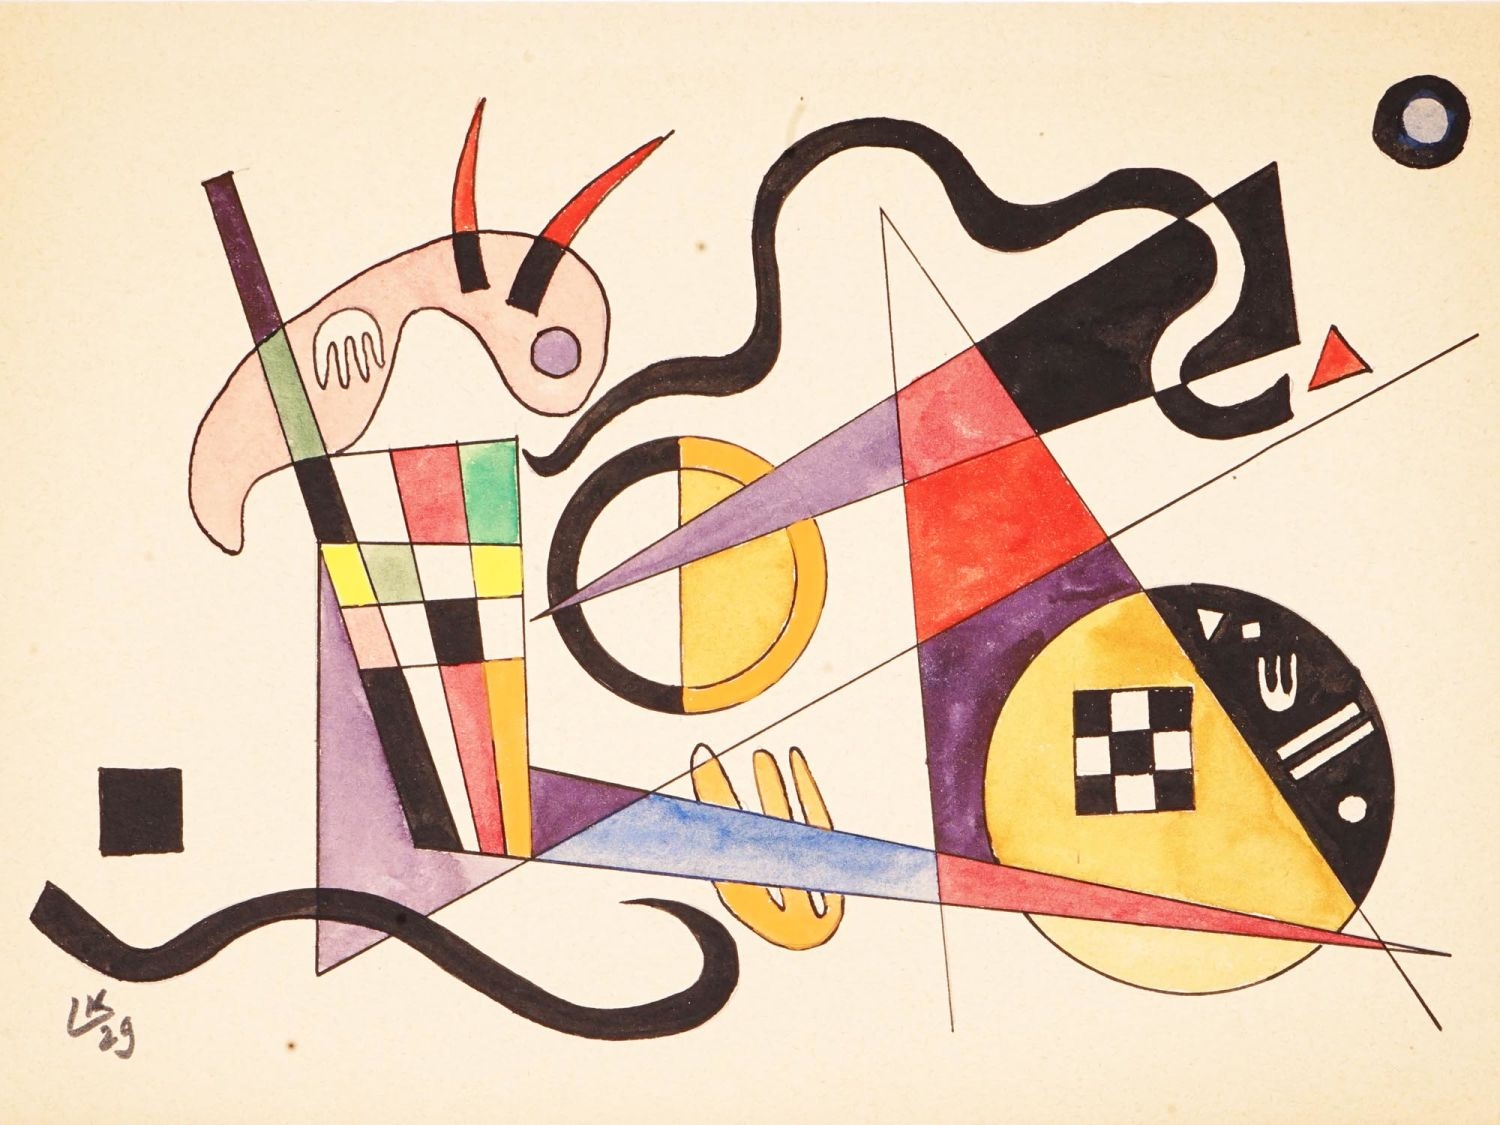 Artwork by Wassily Kandinsky, A WASSILY KANDISKY MIXED MEDIA ABSTRACT PAINTING, 1929, Made of mixed media on paper